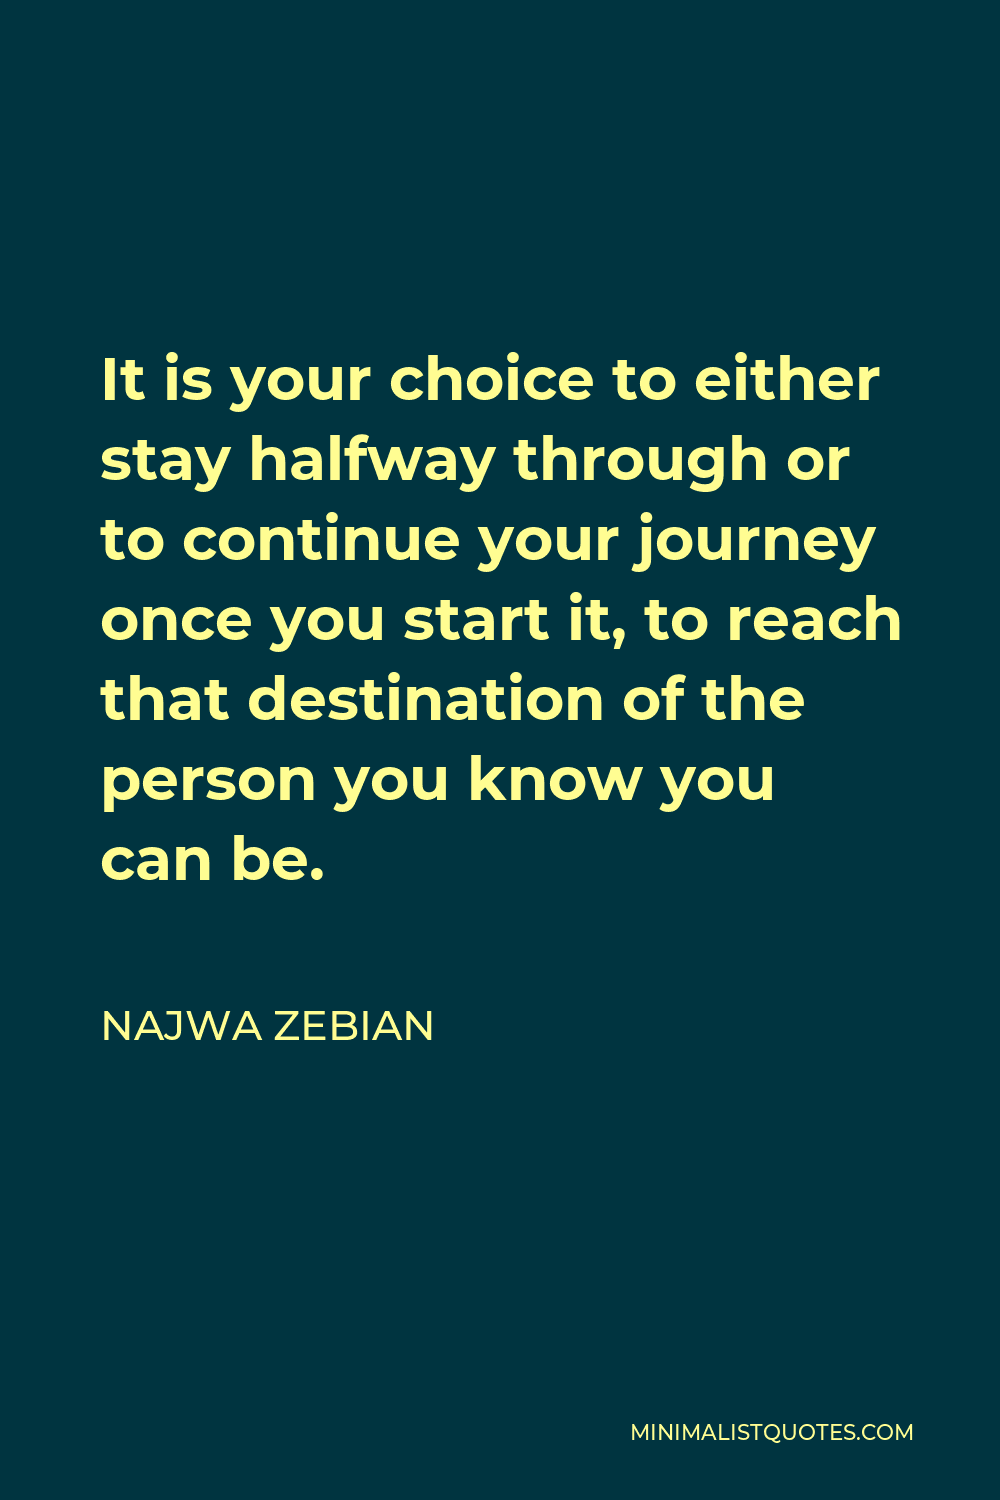 Najwa Zebian Quote - It is your choice to either stay halfway through or to continue your journey once you start it, to reach that destination of the person you know you can be.